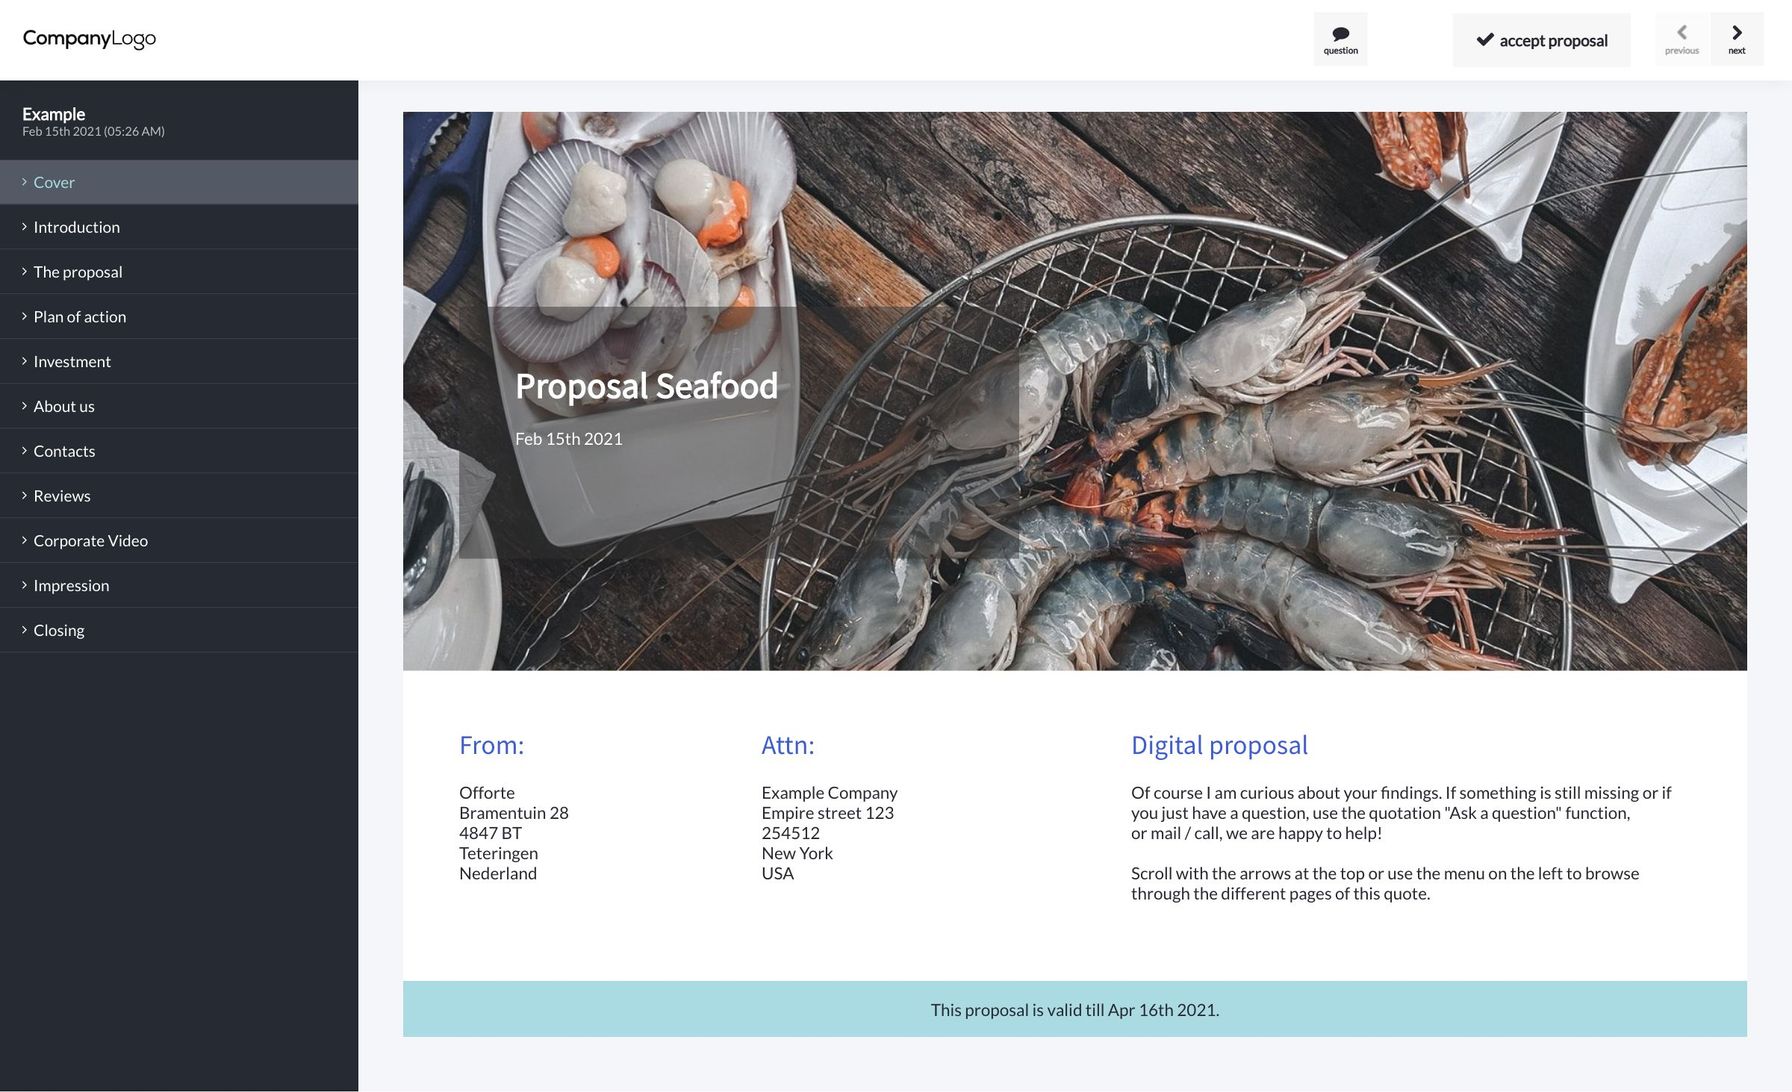 This Seafood proposal example will make you the one to catch the big fish